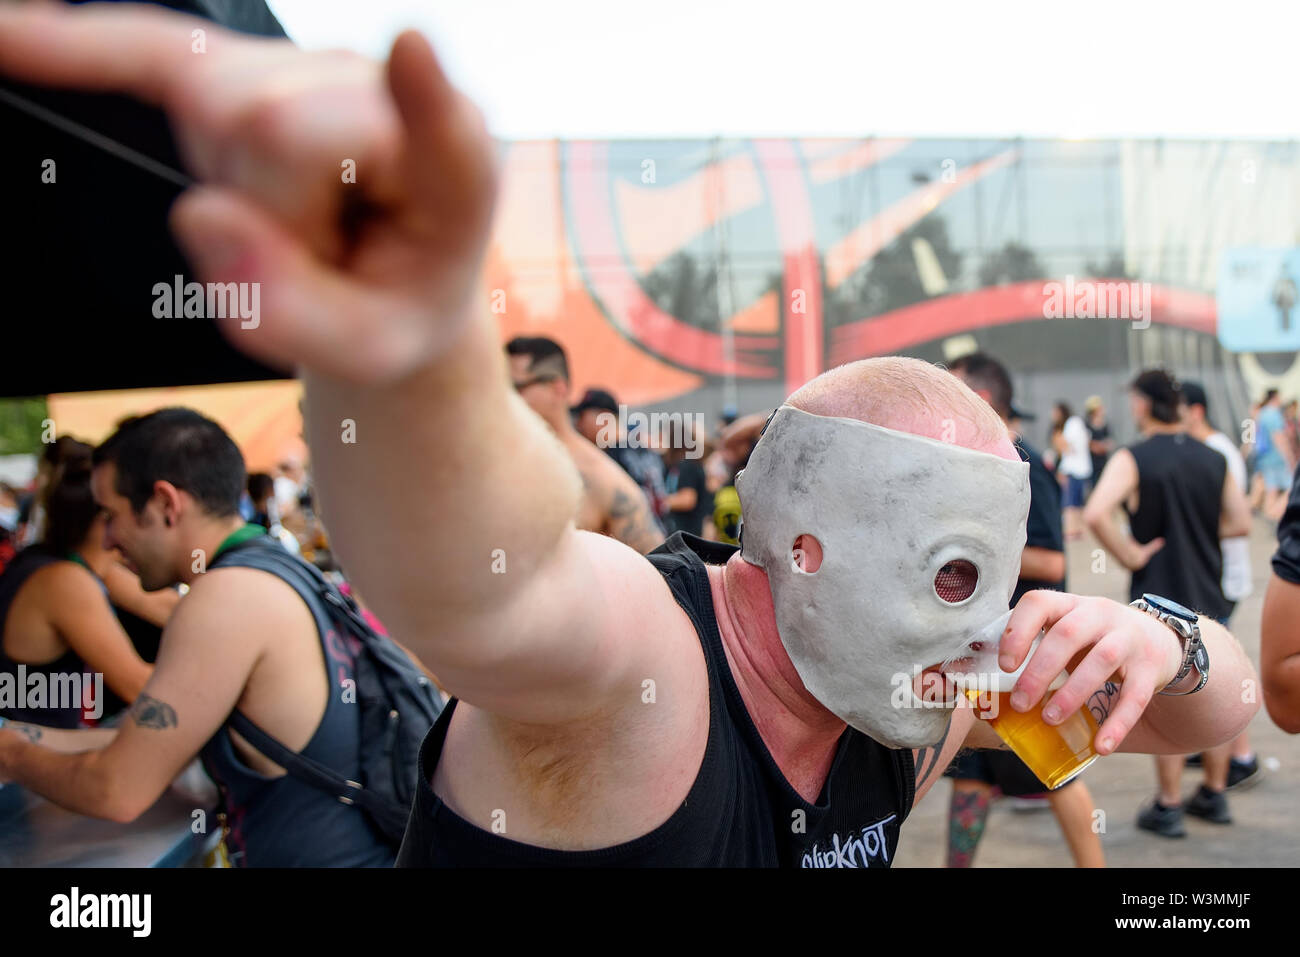 MADRID - JUN 30: A fan with the Slipknot mask drinks beer in a concert at Download (heavy metal music festival) on June 30, 2019 in Madrid, Spain. Stock Photo